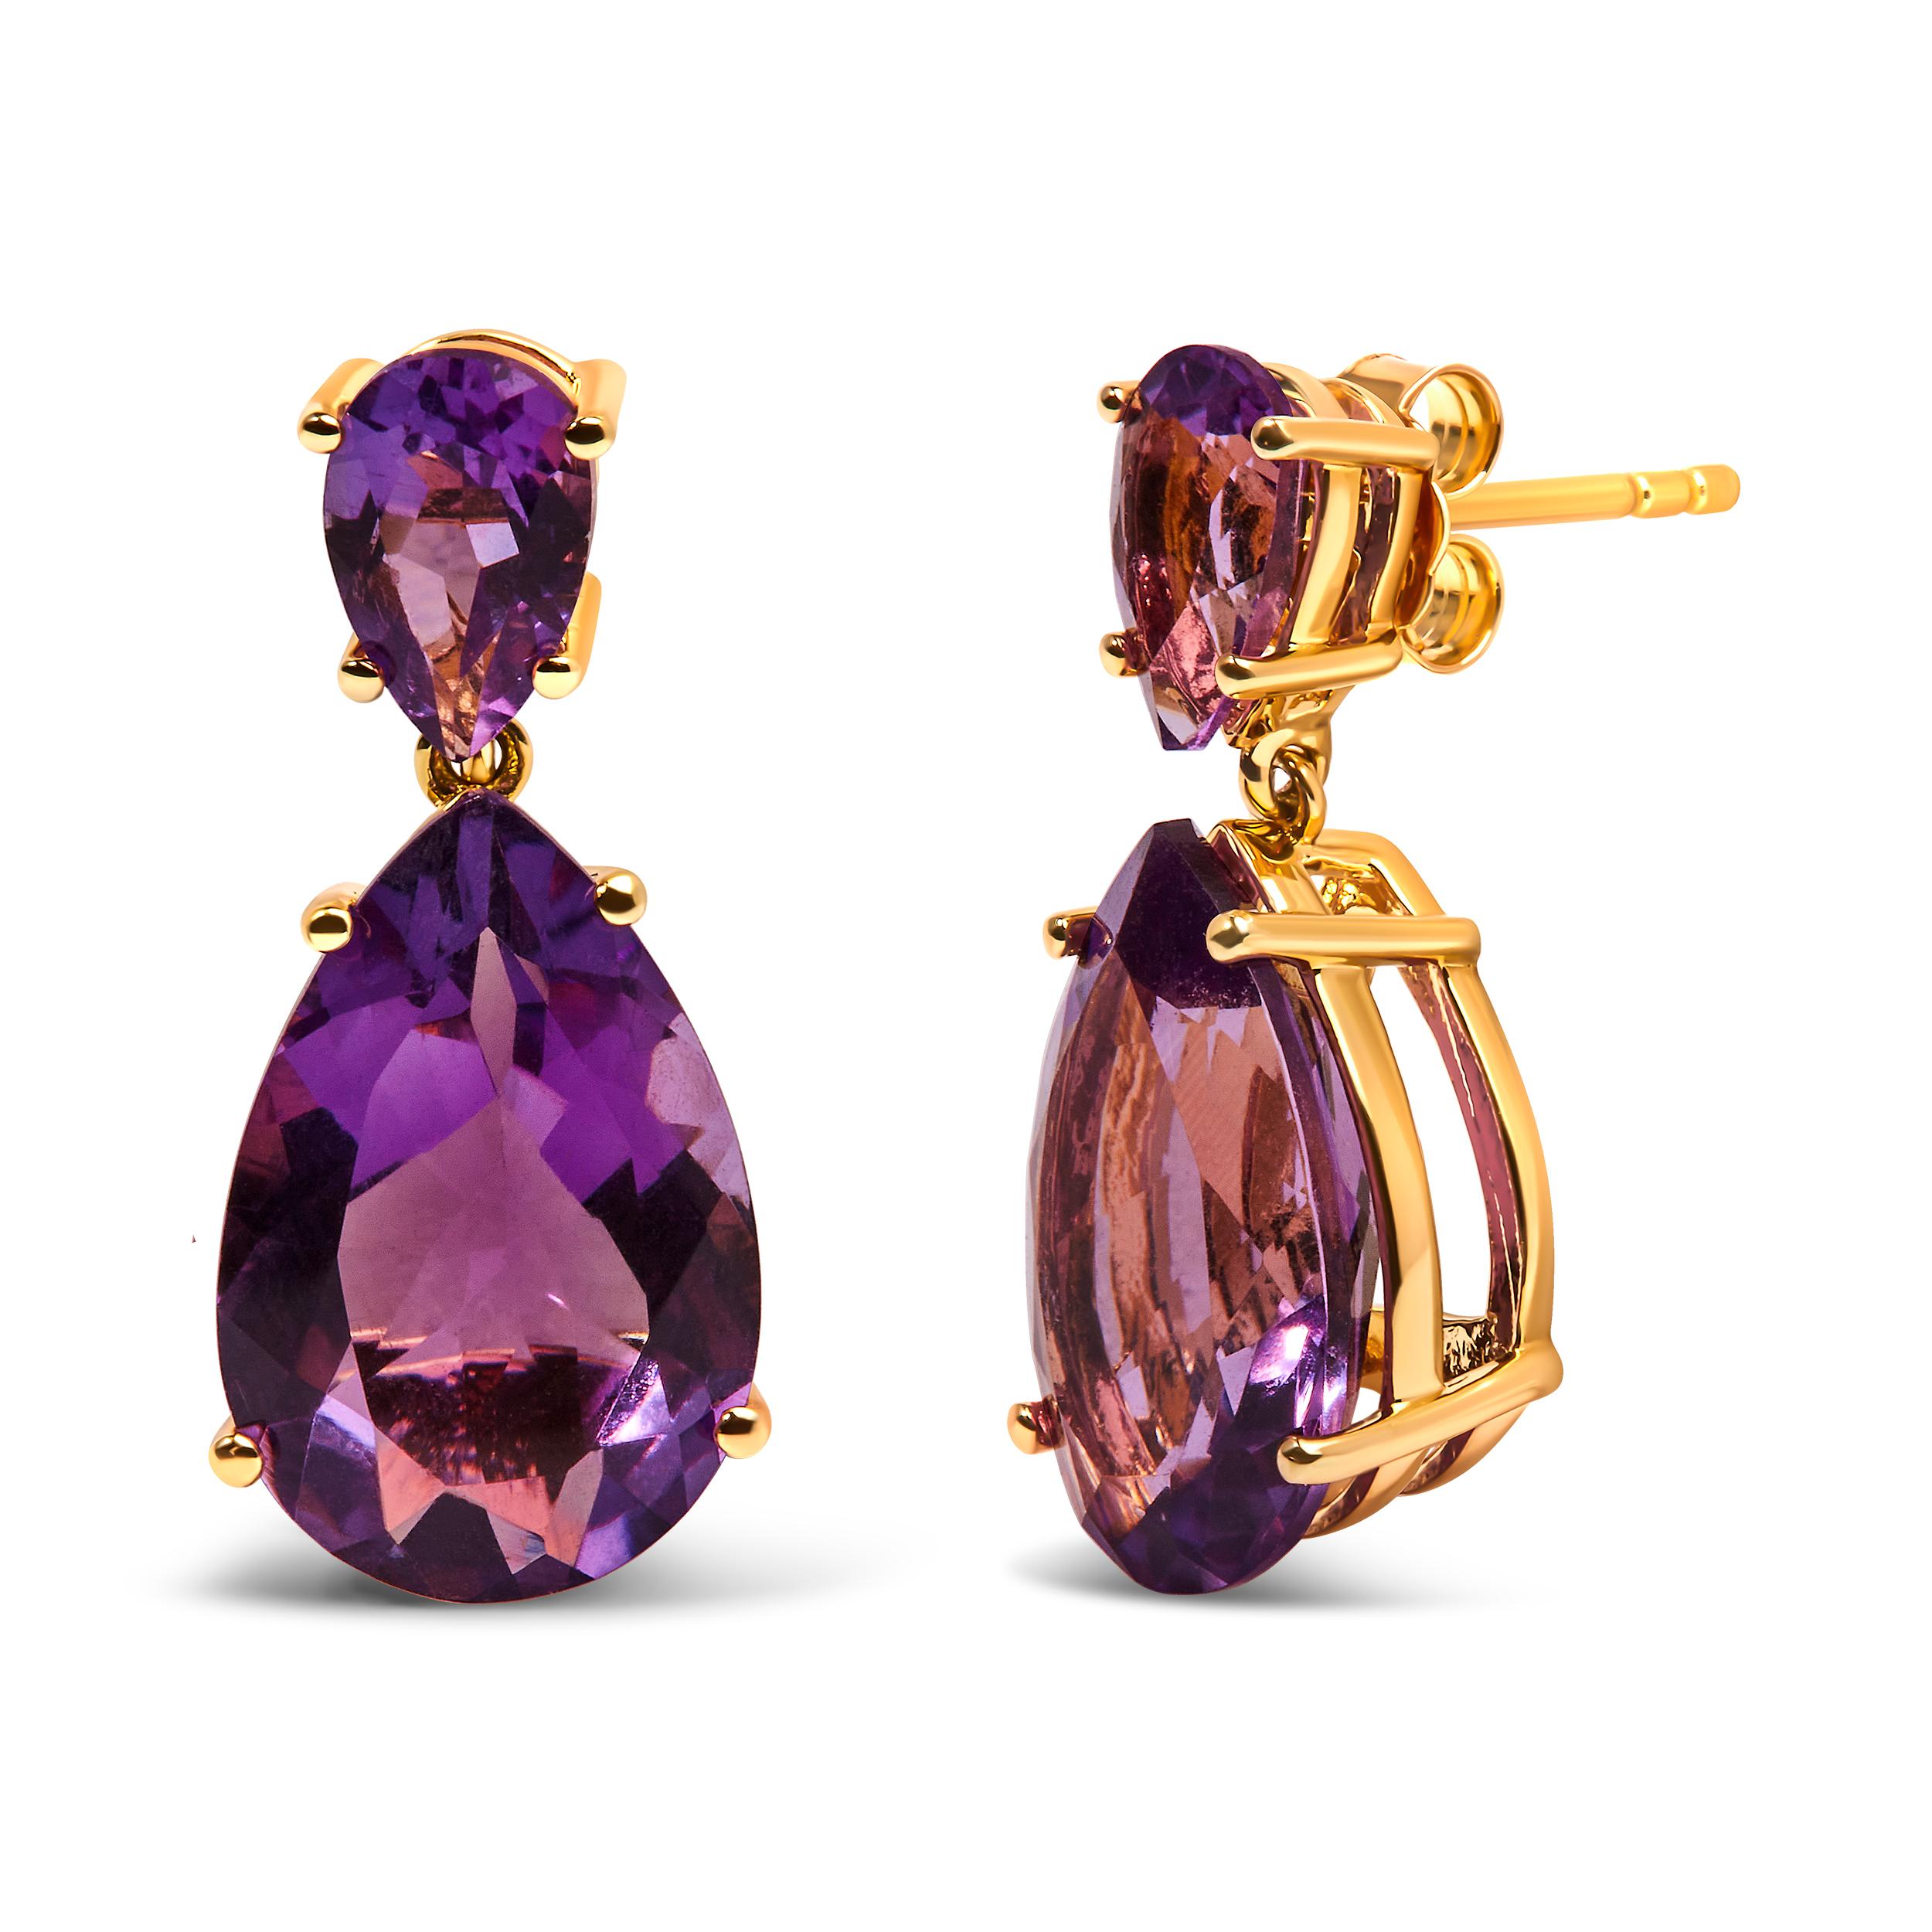 Introducing a celestial masterpiece that will leave you mesmerized - these 10K Yellow Gold Plated .925 Sterling Silver Dangle and Drop Earrings. Crafted with precision, these earrings feature a stunning pair of 4 pear-shaped Purple Brazilian